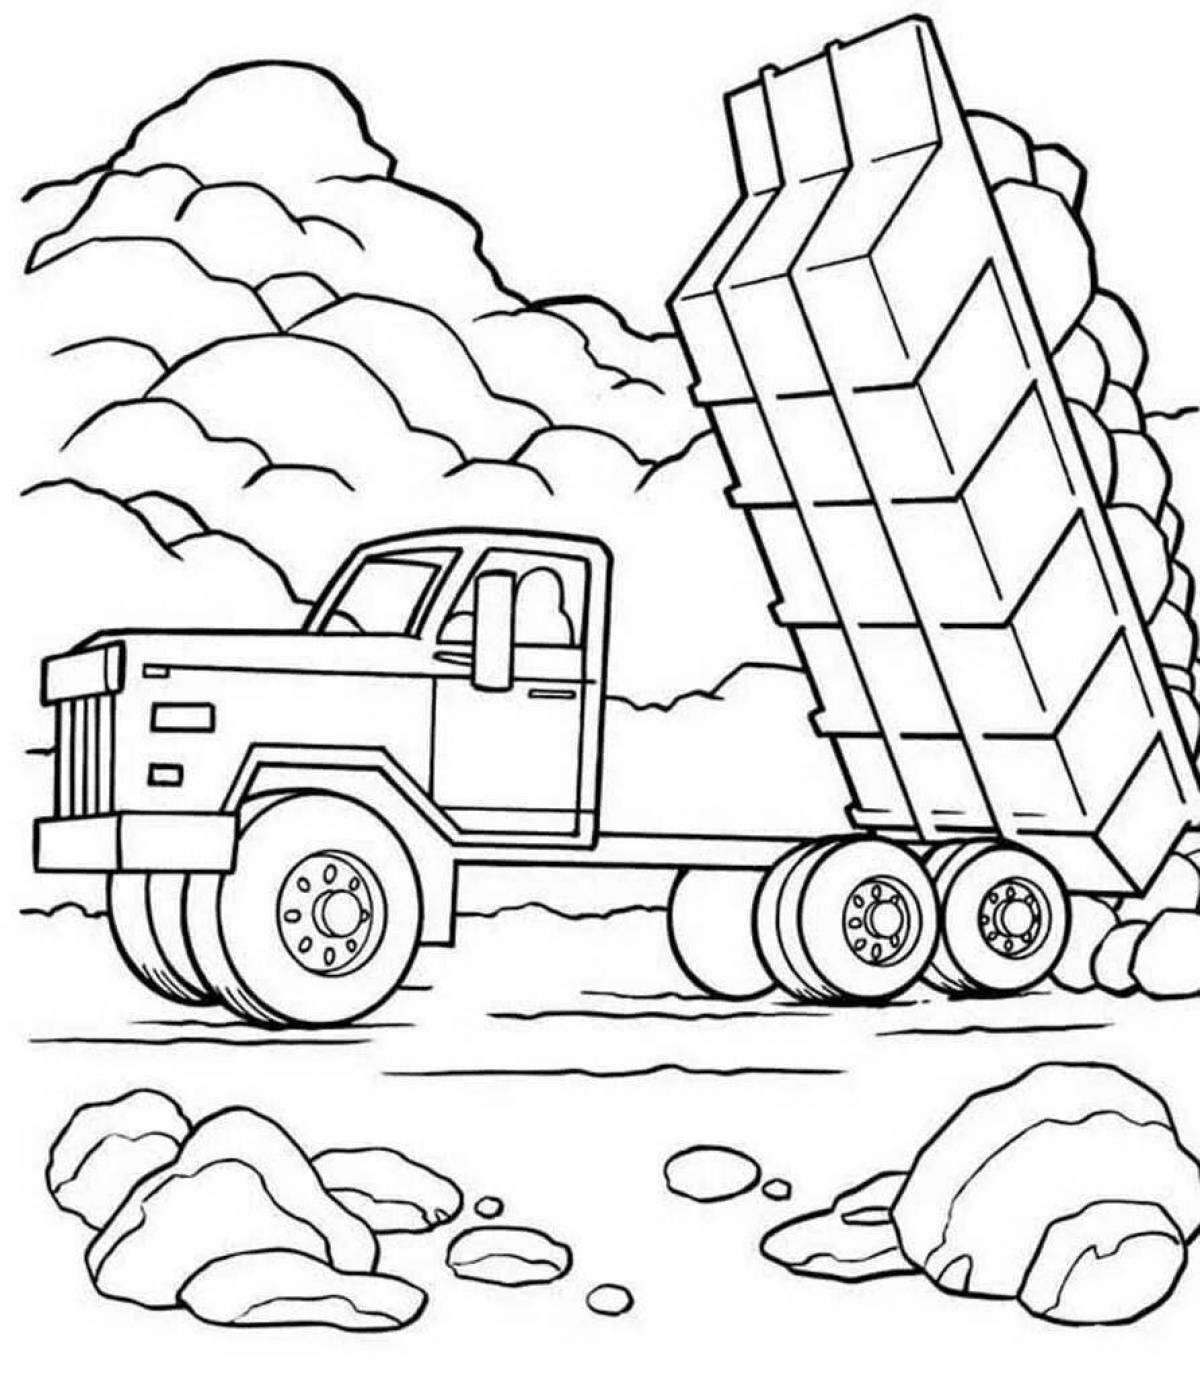 Joyful truck coloring book for 4-5 year olds